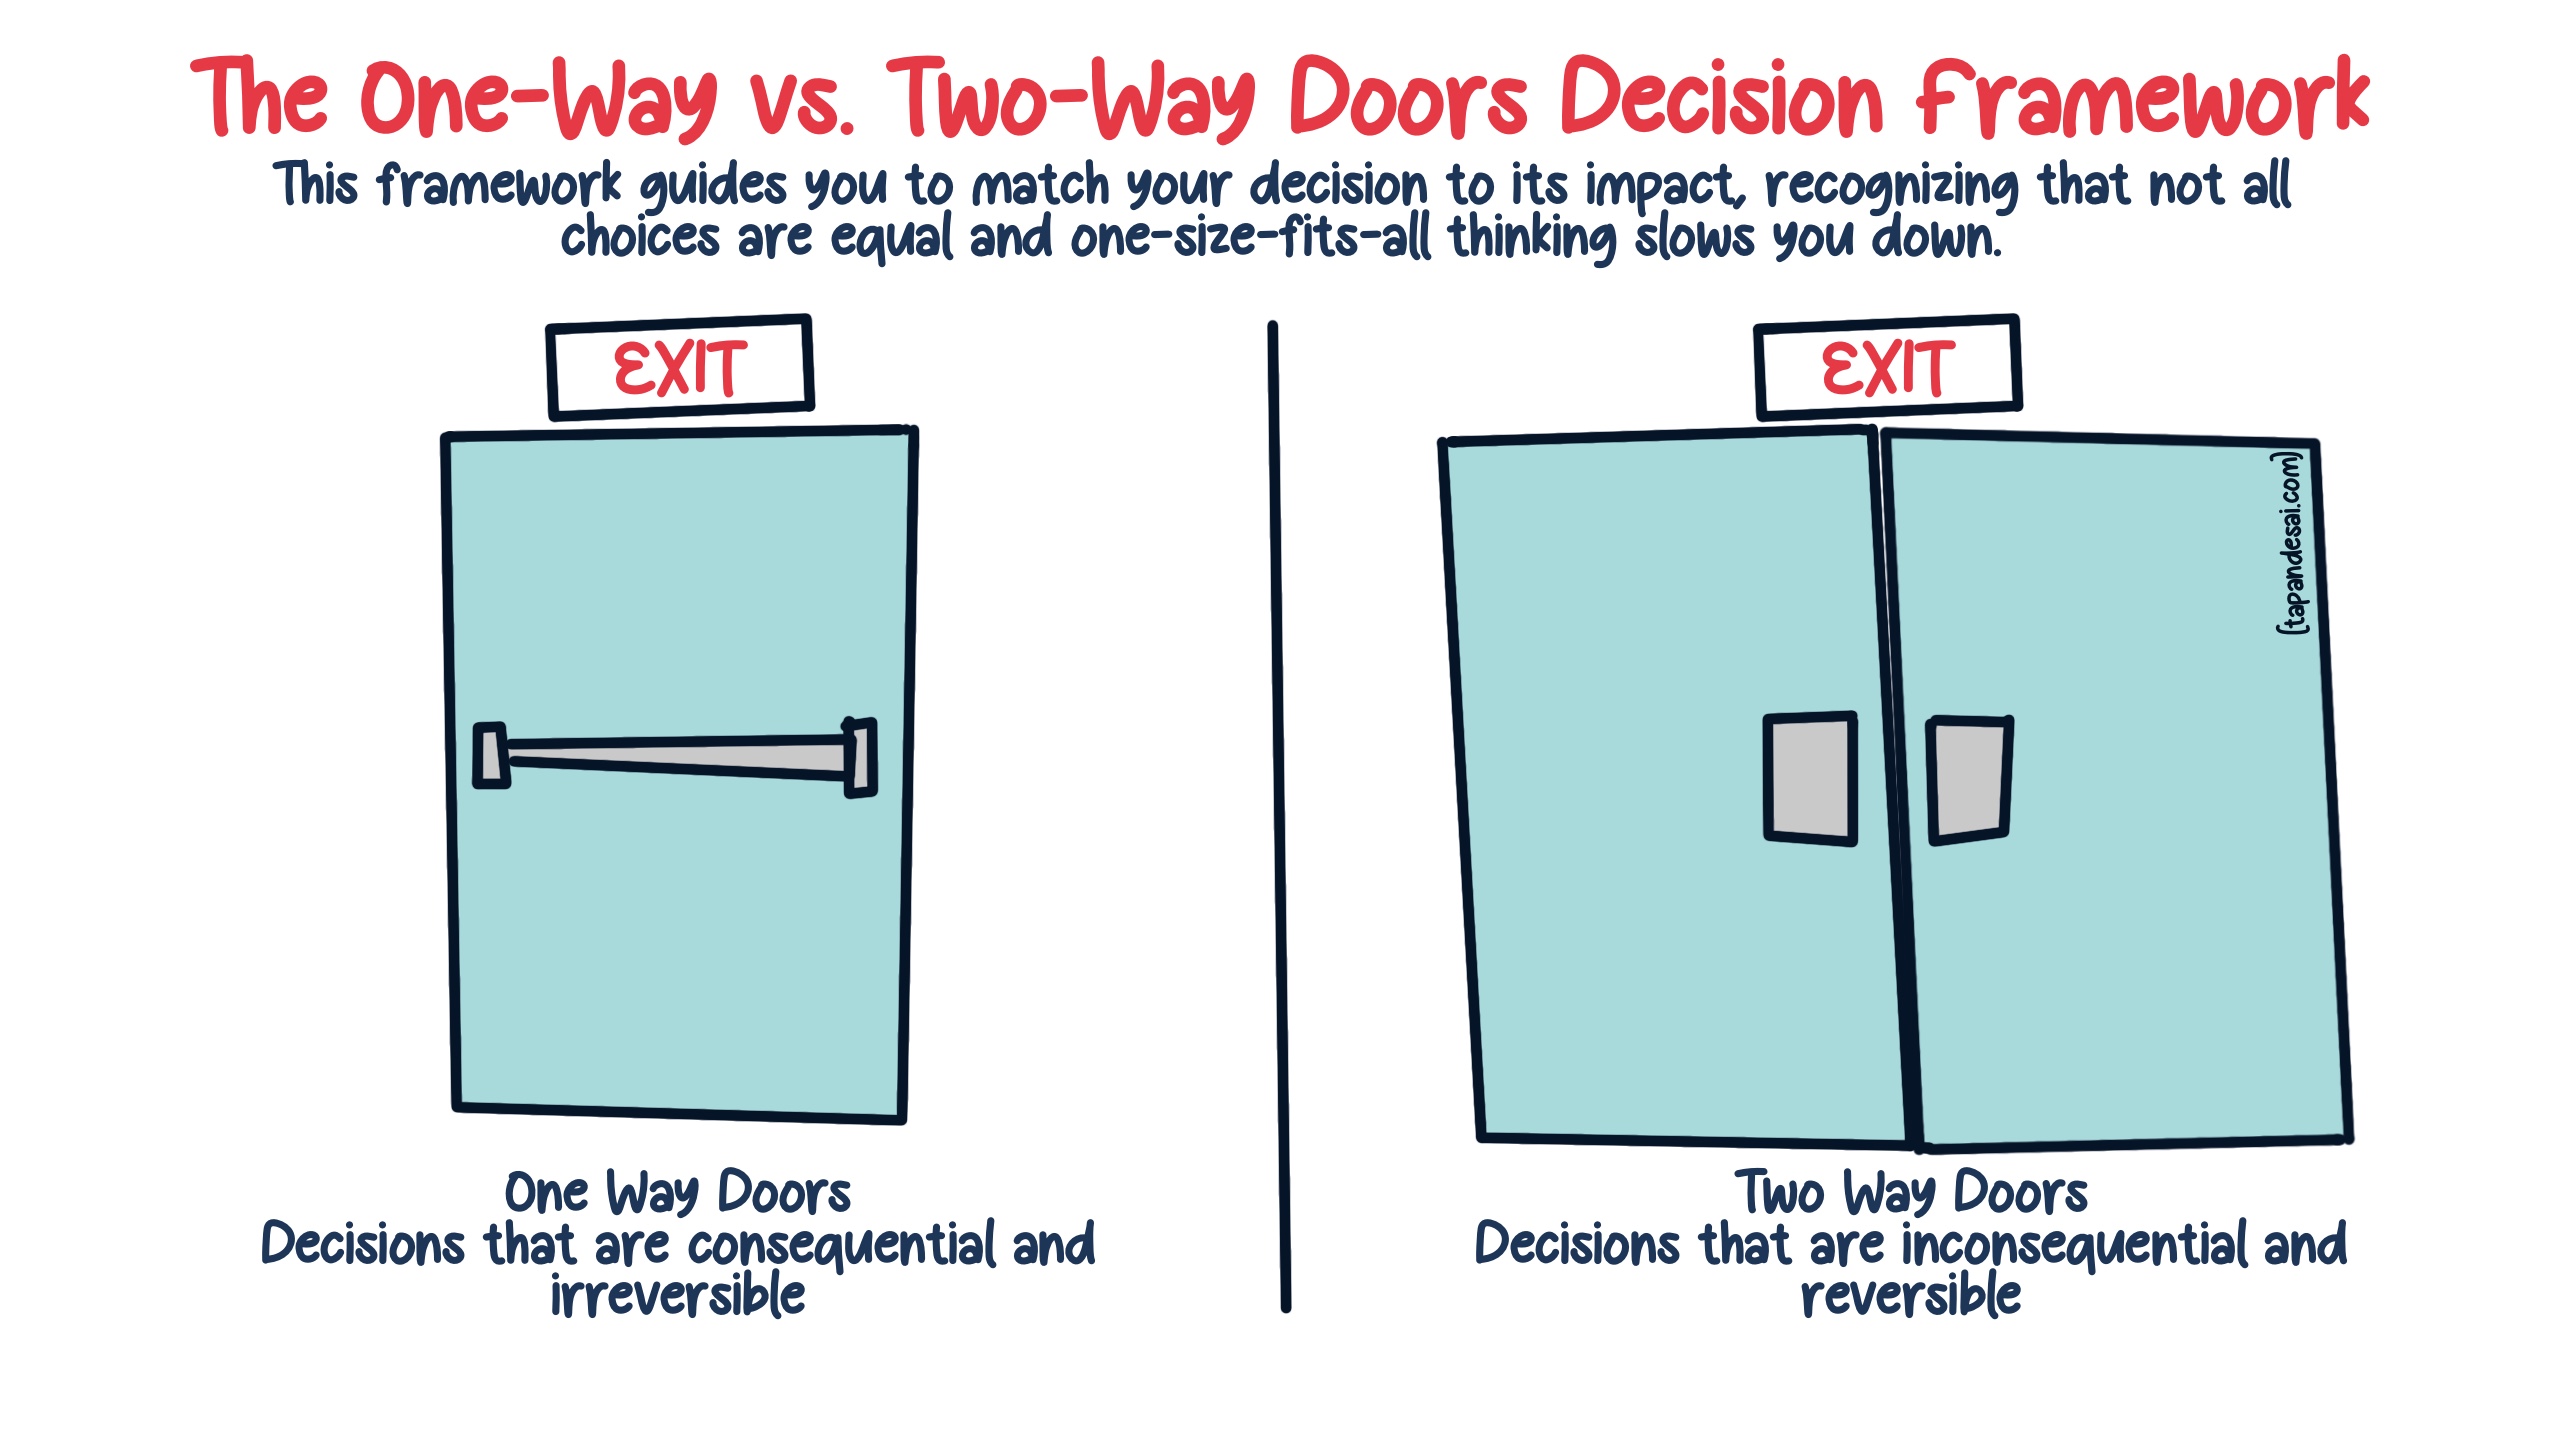 The one-way vs. two-way door decision making framework explained in an image showing the door framework and definition by Tapan Desai